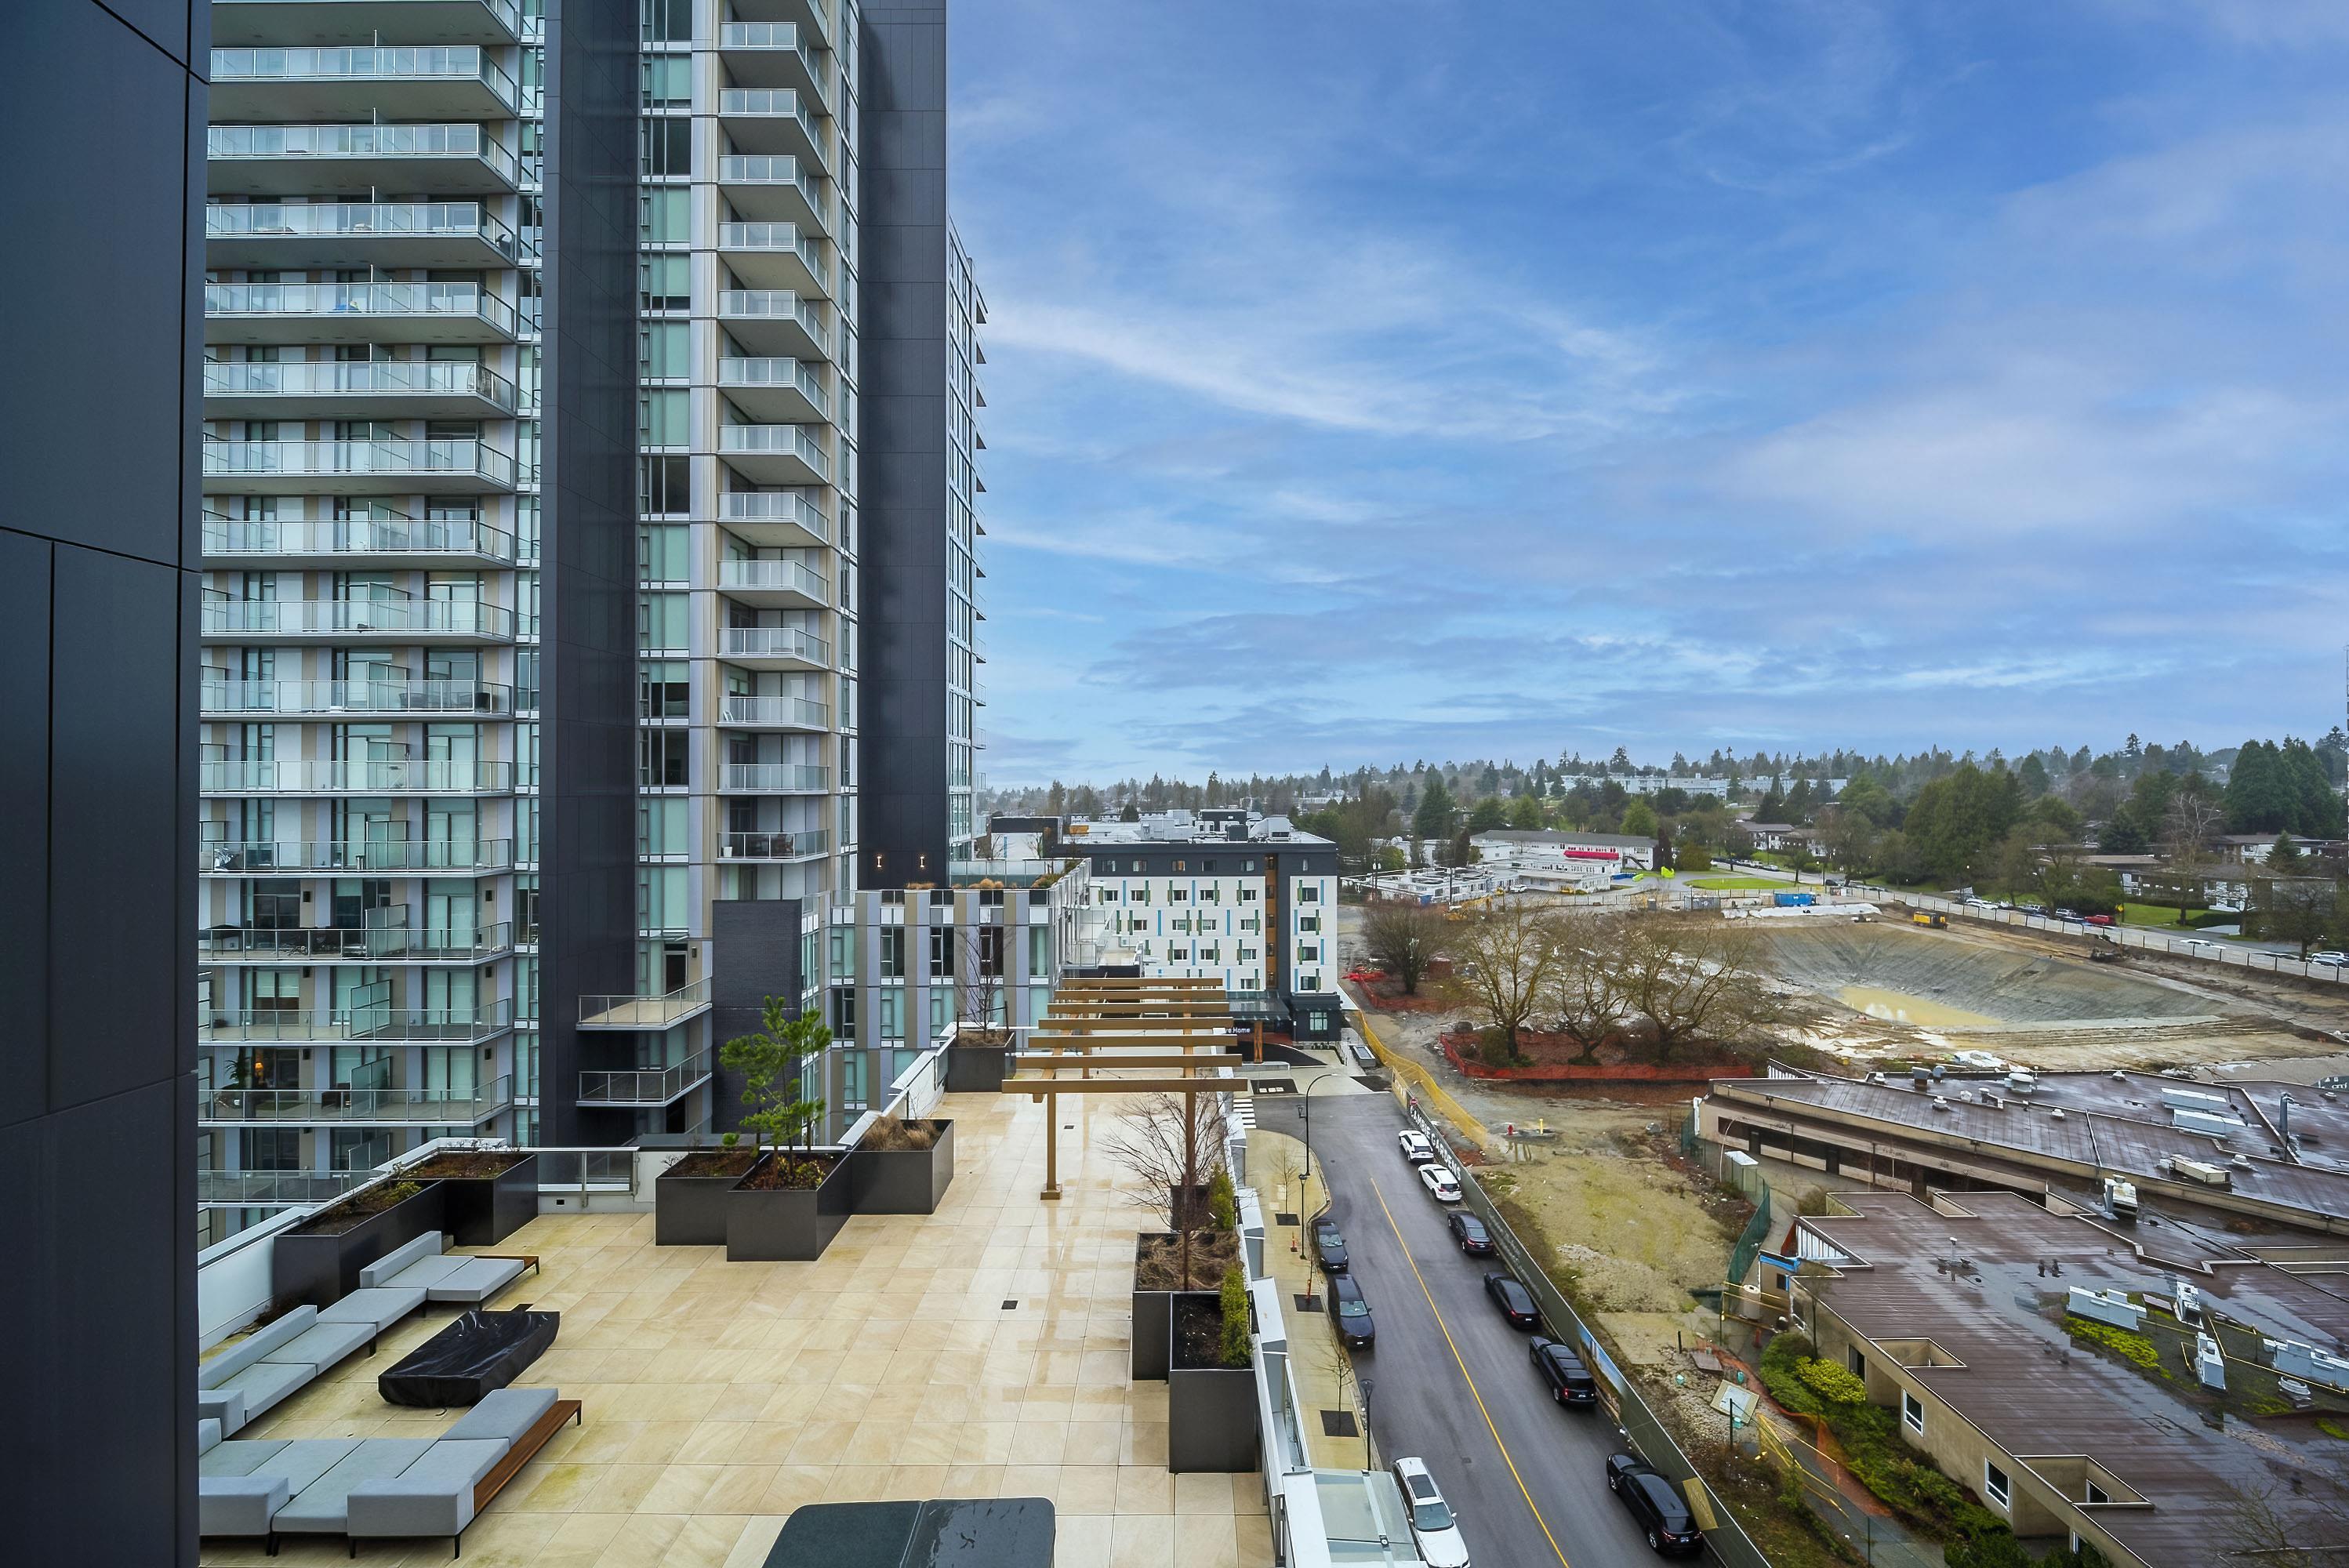 Listing image of 1207 7433 CAMBIE STREET